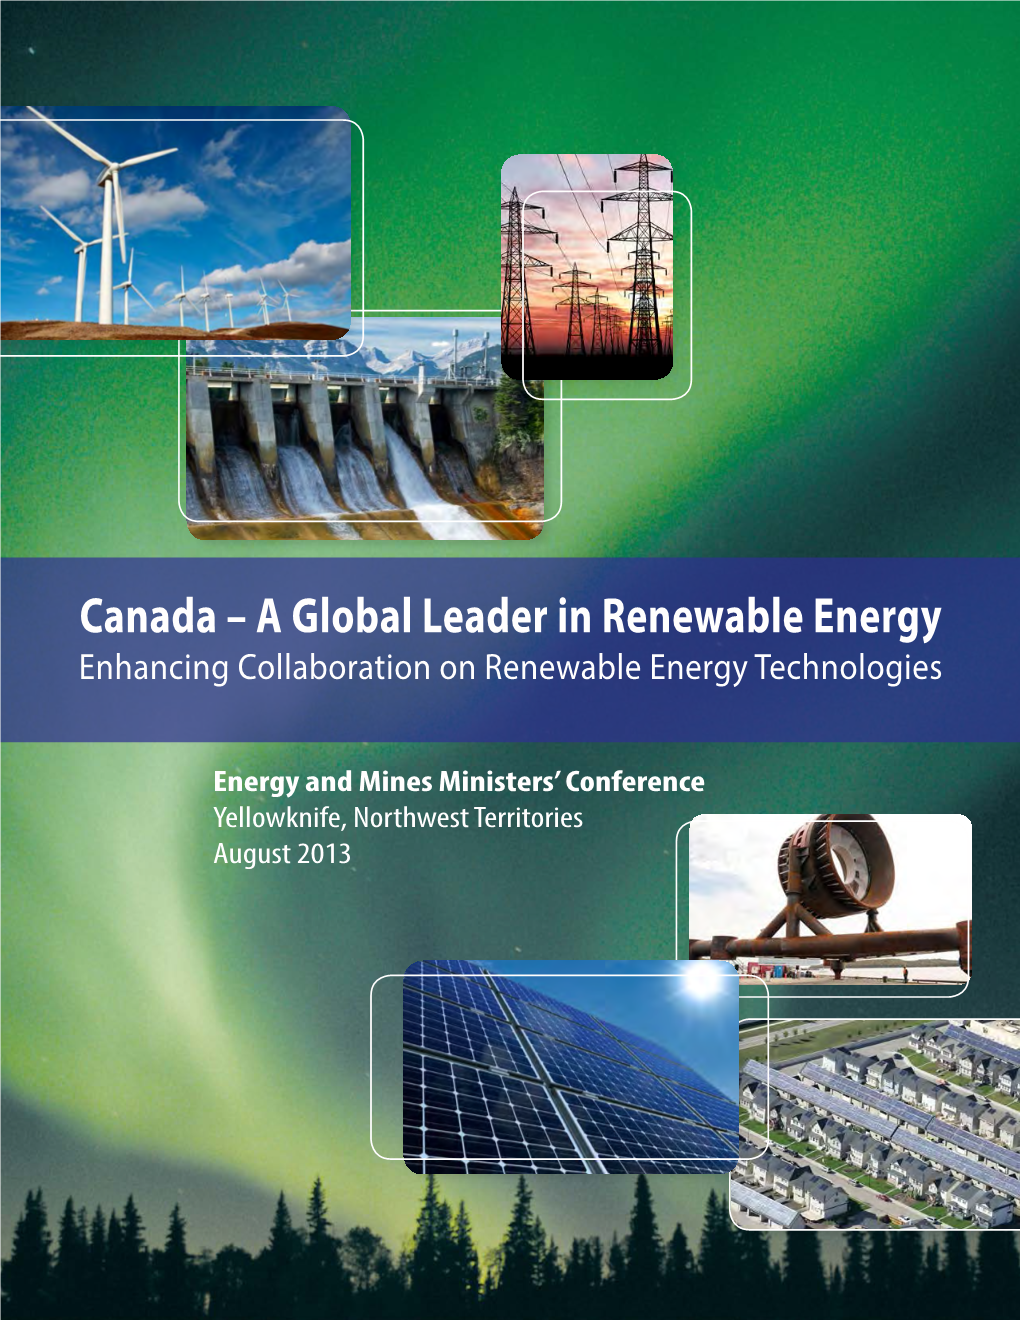 Canada – a Global Leader in Renewable Energy Enhancing Collaboration on Renewable Energy Technologies